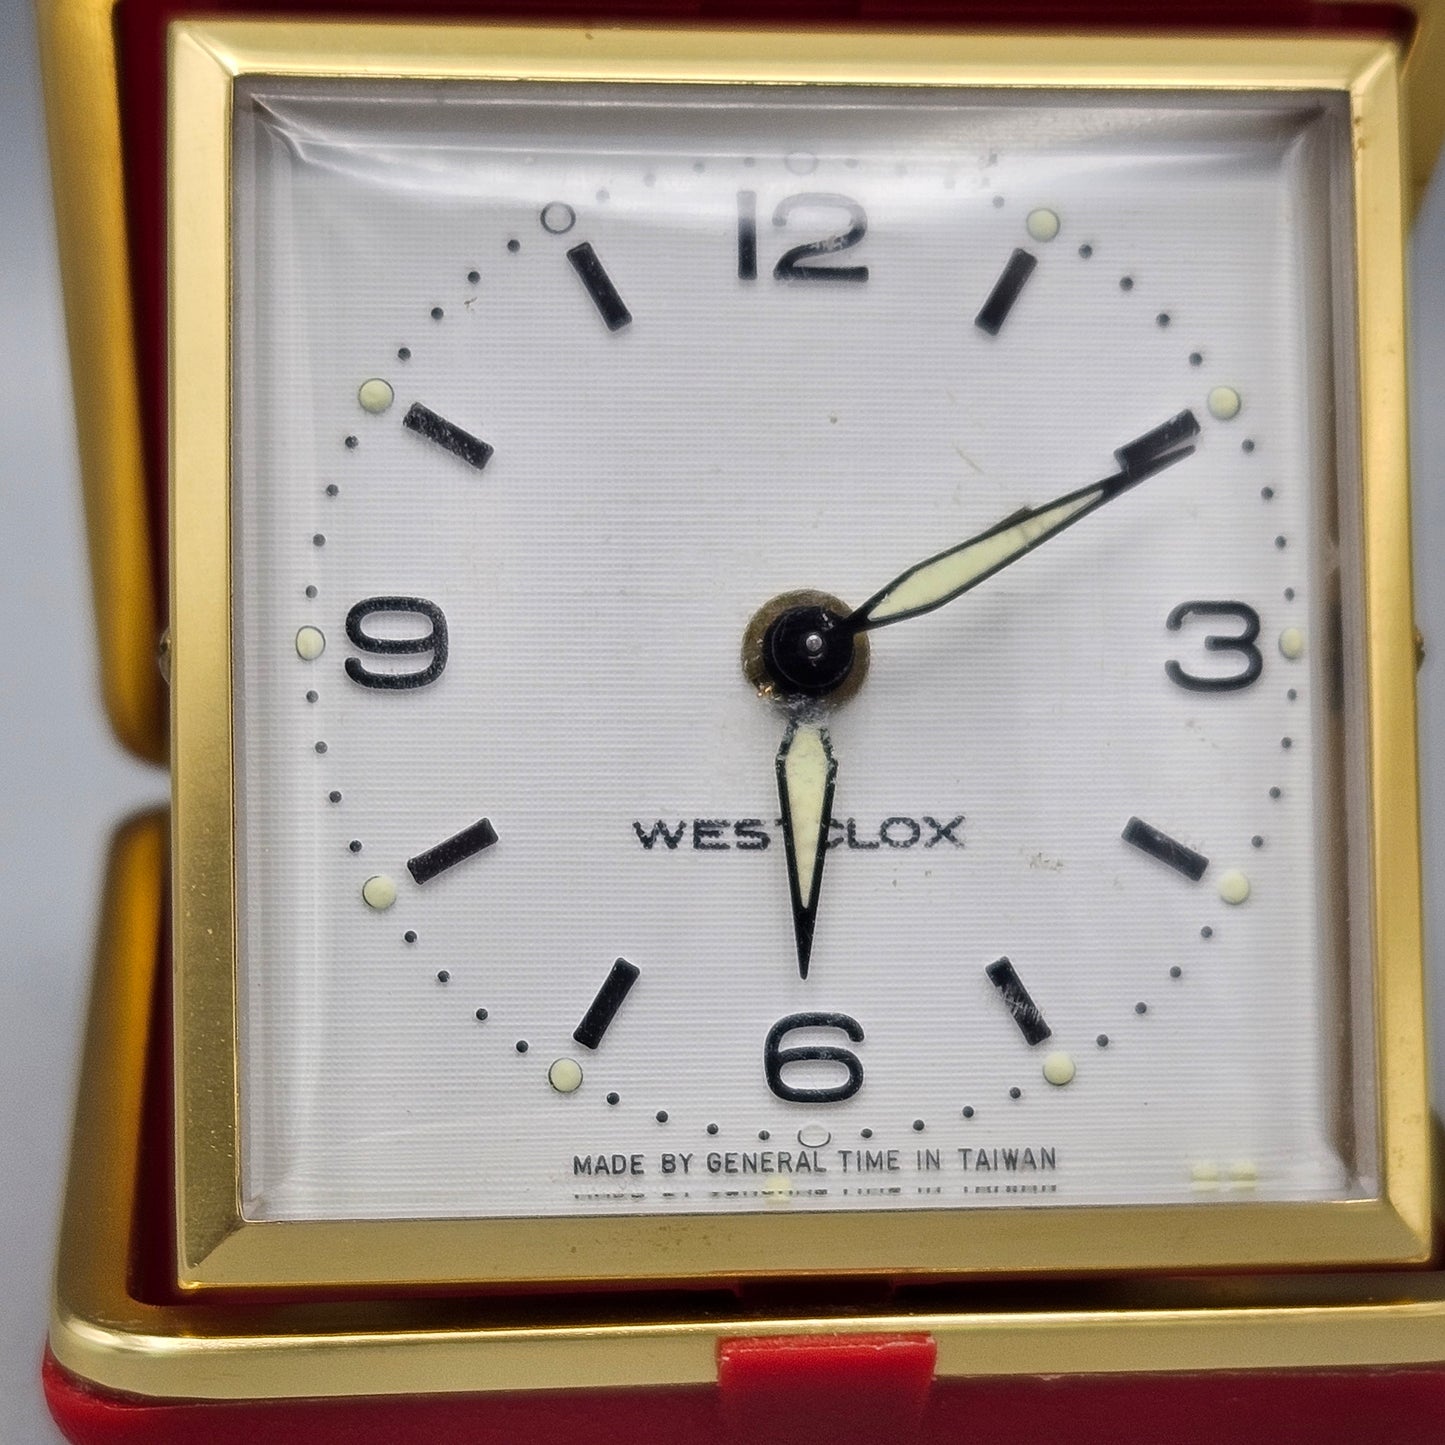 Vintage Westclox Folding Travel Alarm Clock - Made by General Time in Taiwan